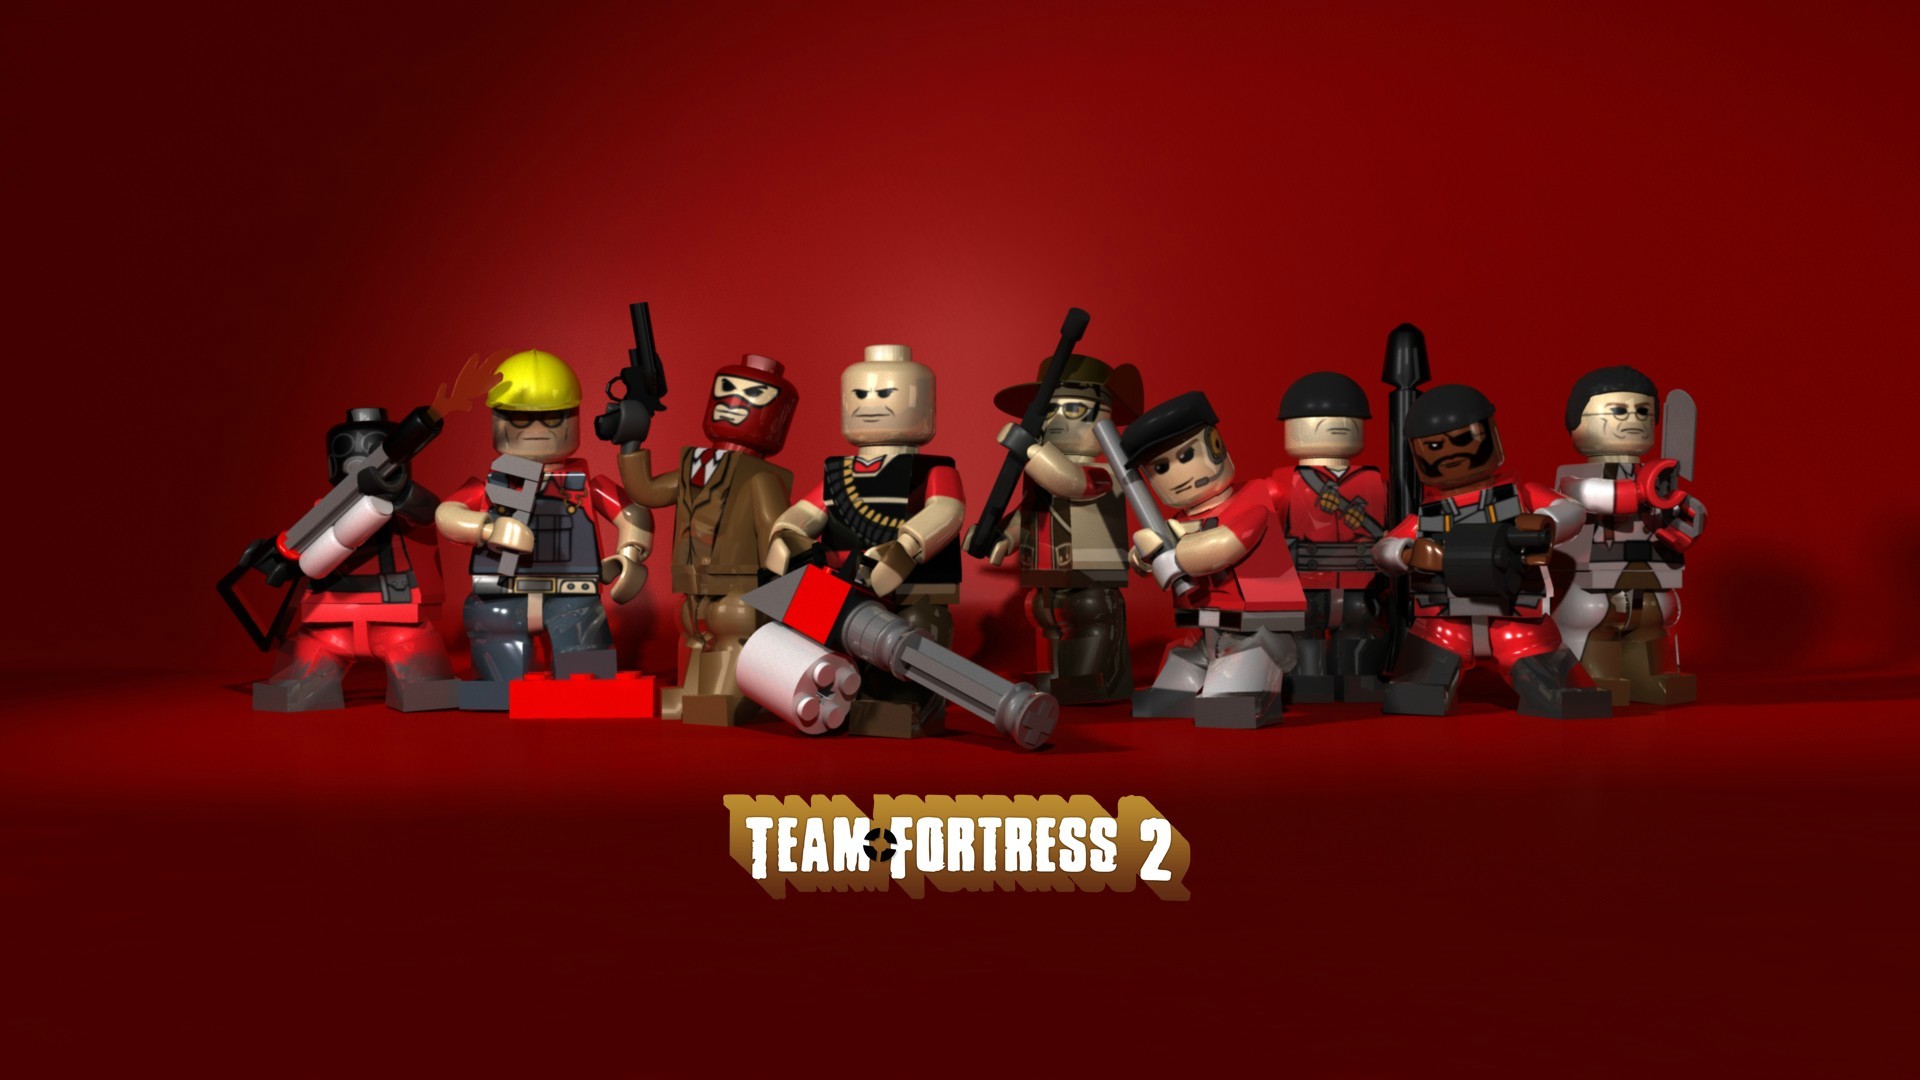 1920x1080 ... 19 cool team fortress 2 wallpapers bc gb ...